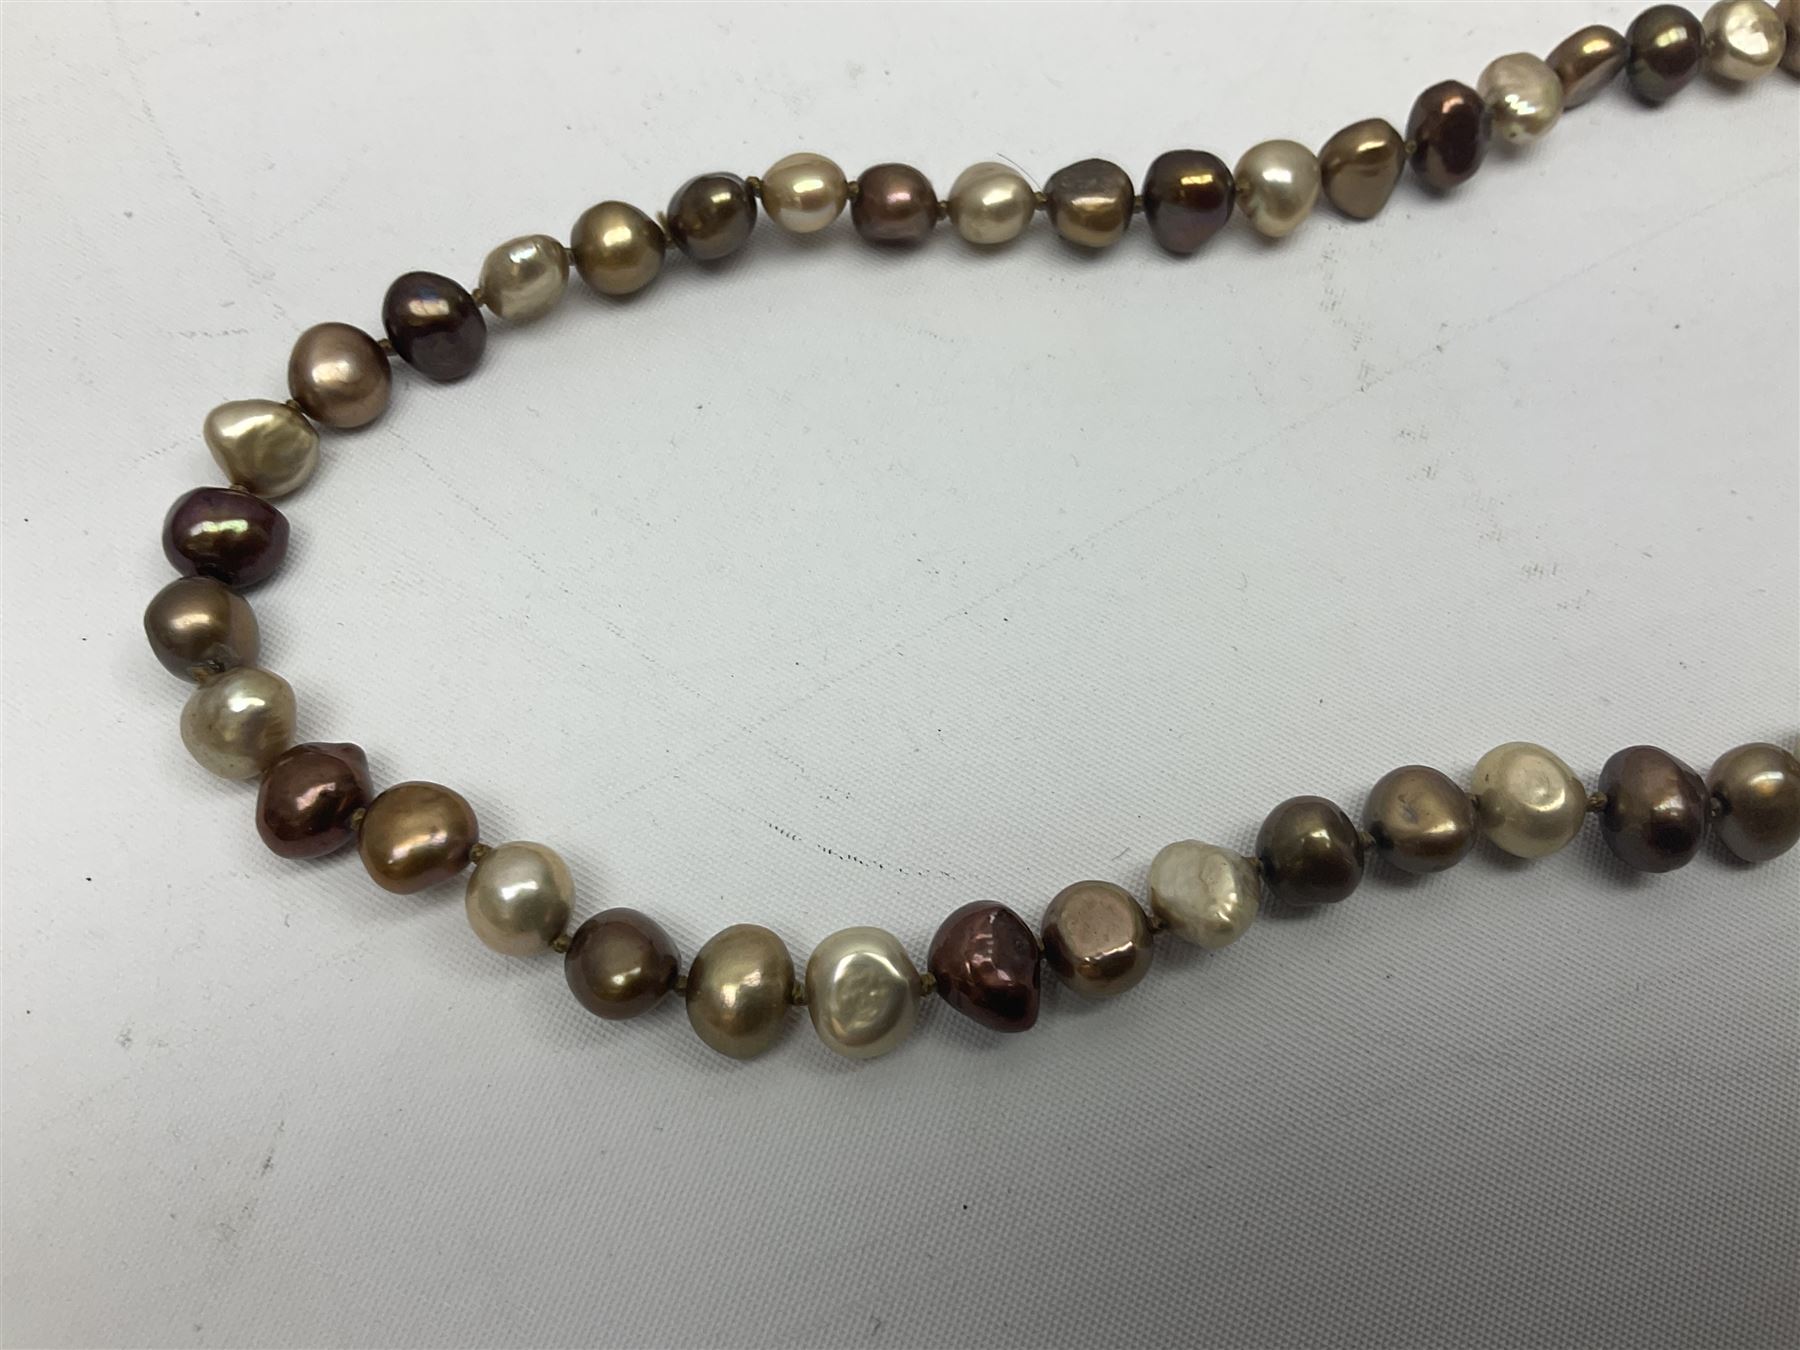 Six fresh water pearl necklaces - Image 23 of 36